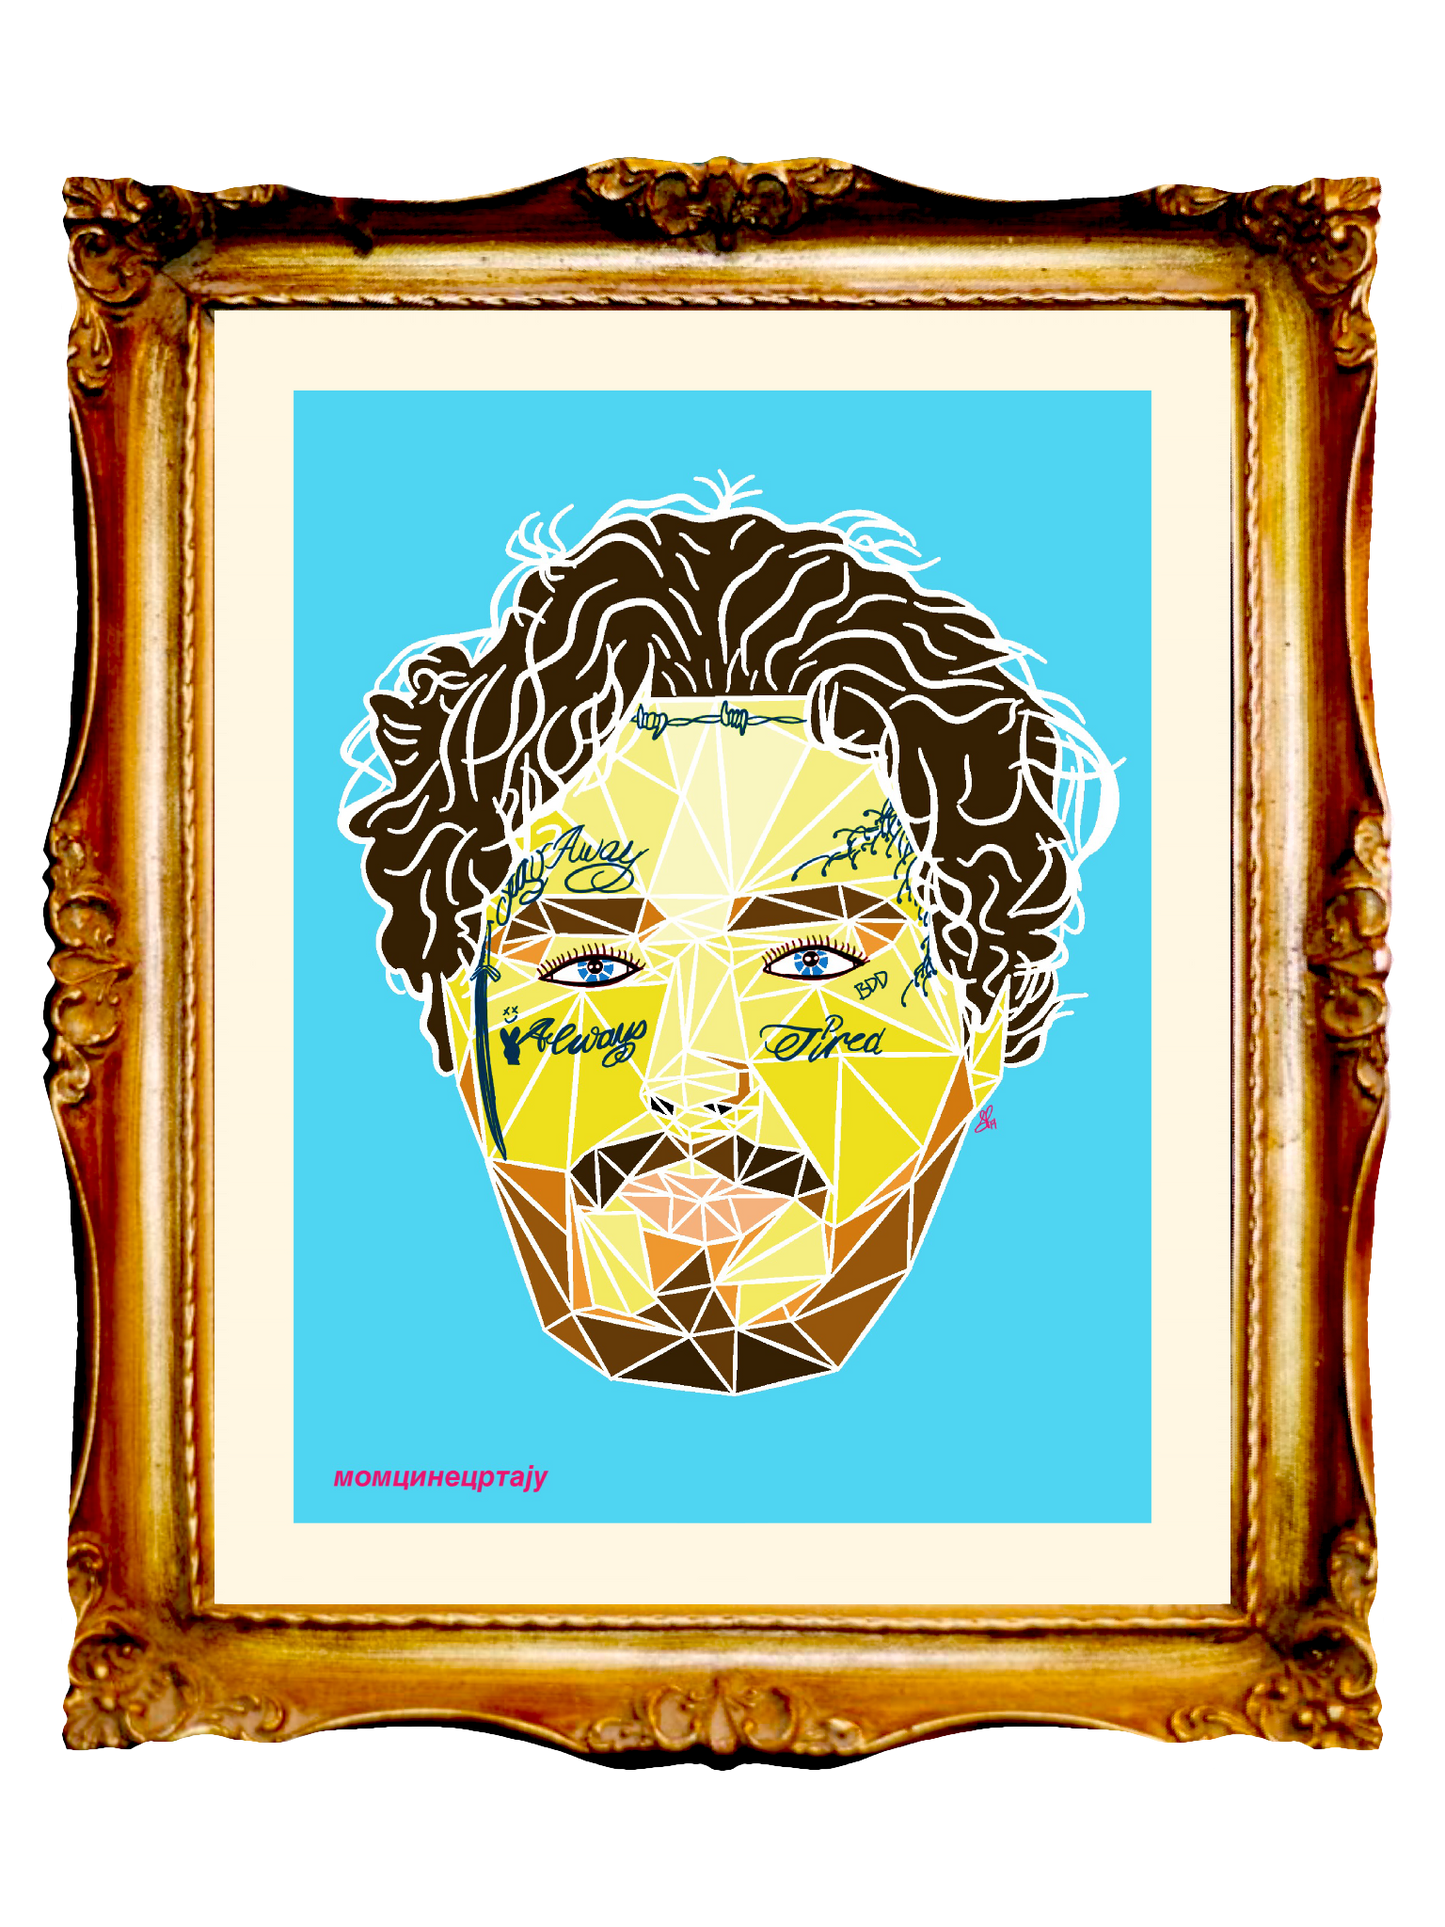 POST MALONE - SUNFLOWER - Limited Poster by BOYSDONTDRAW